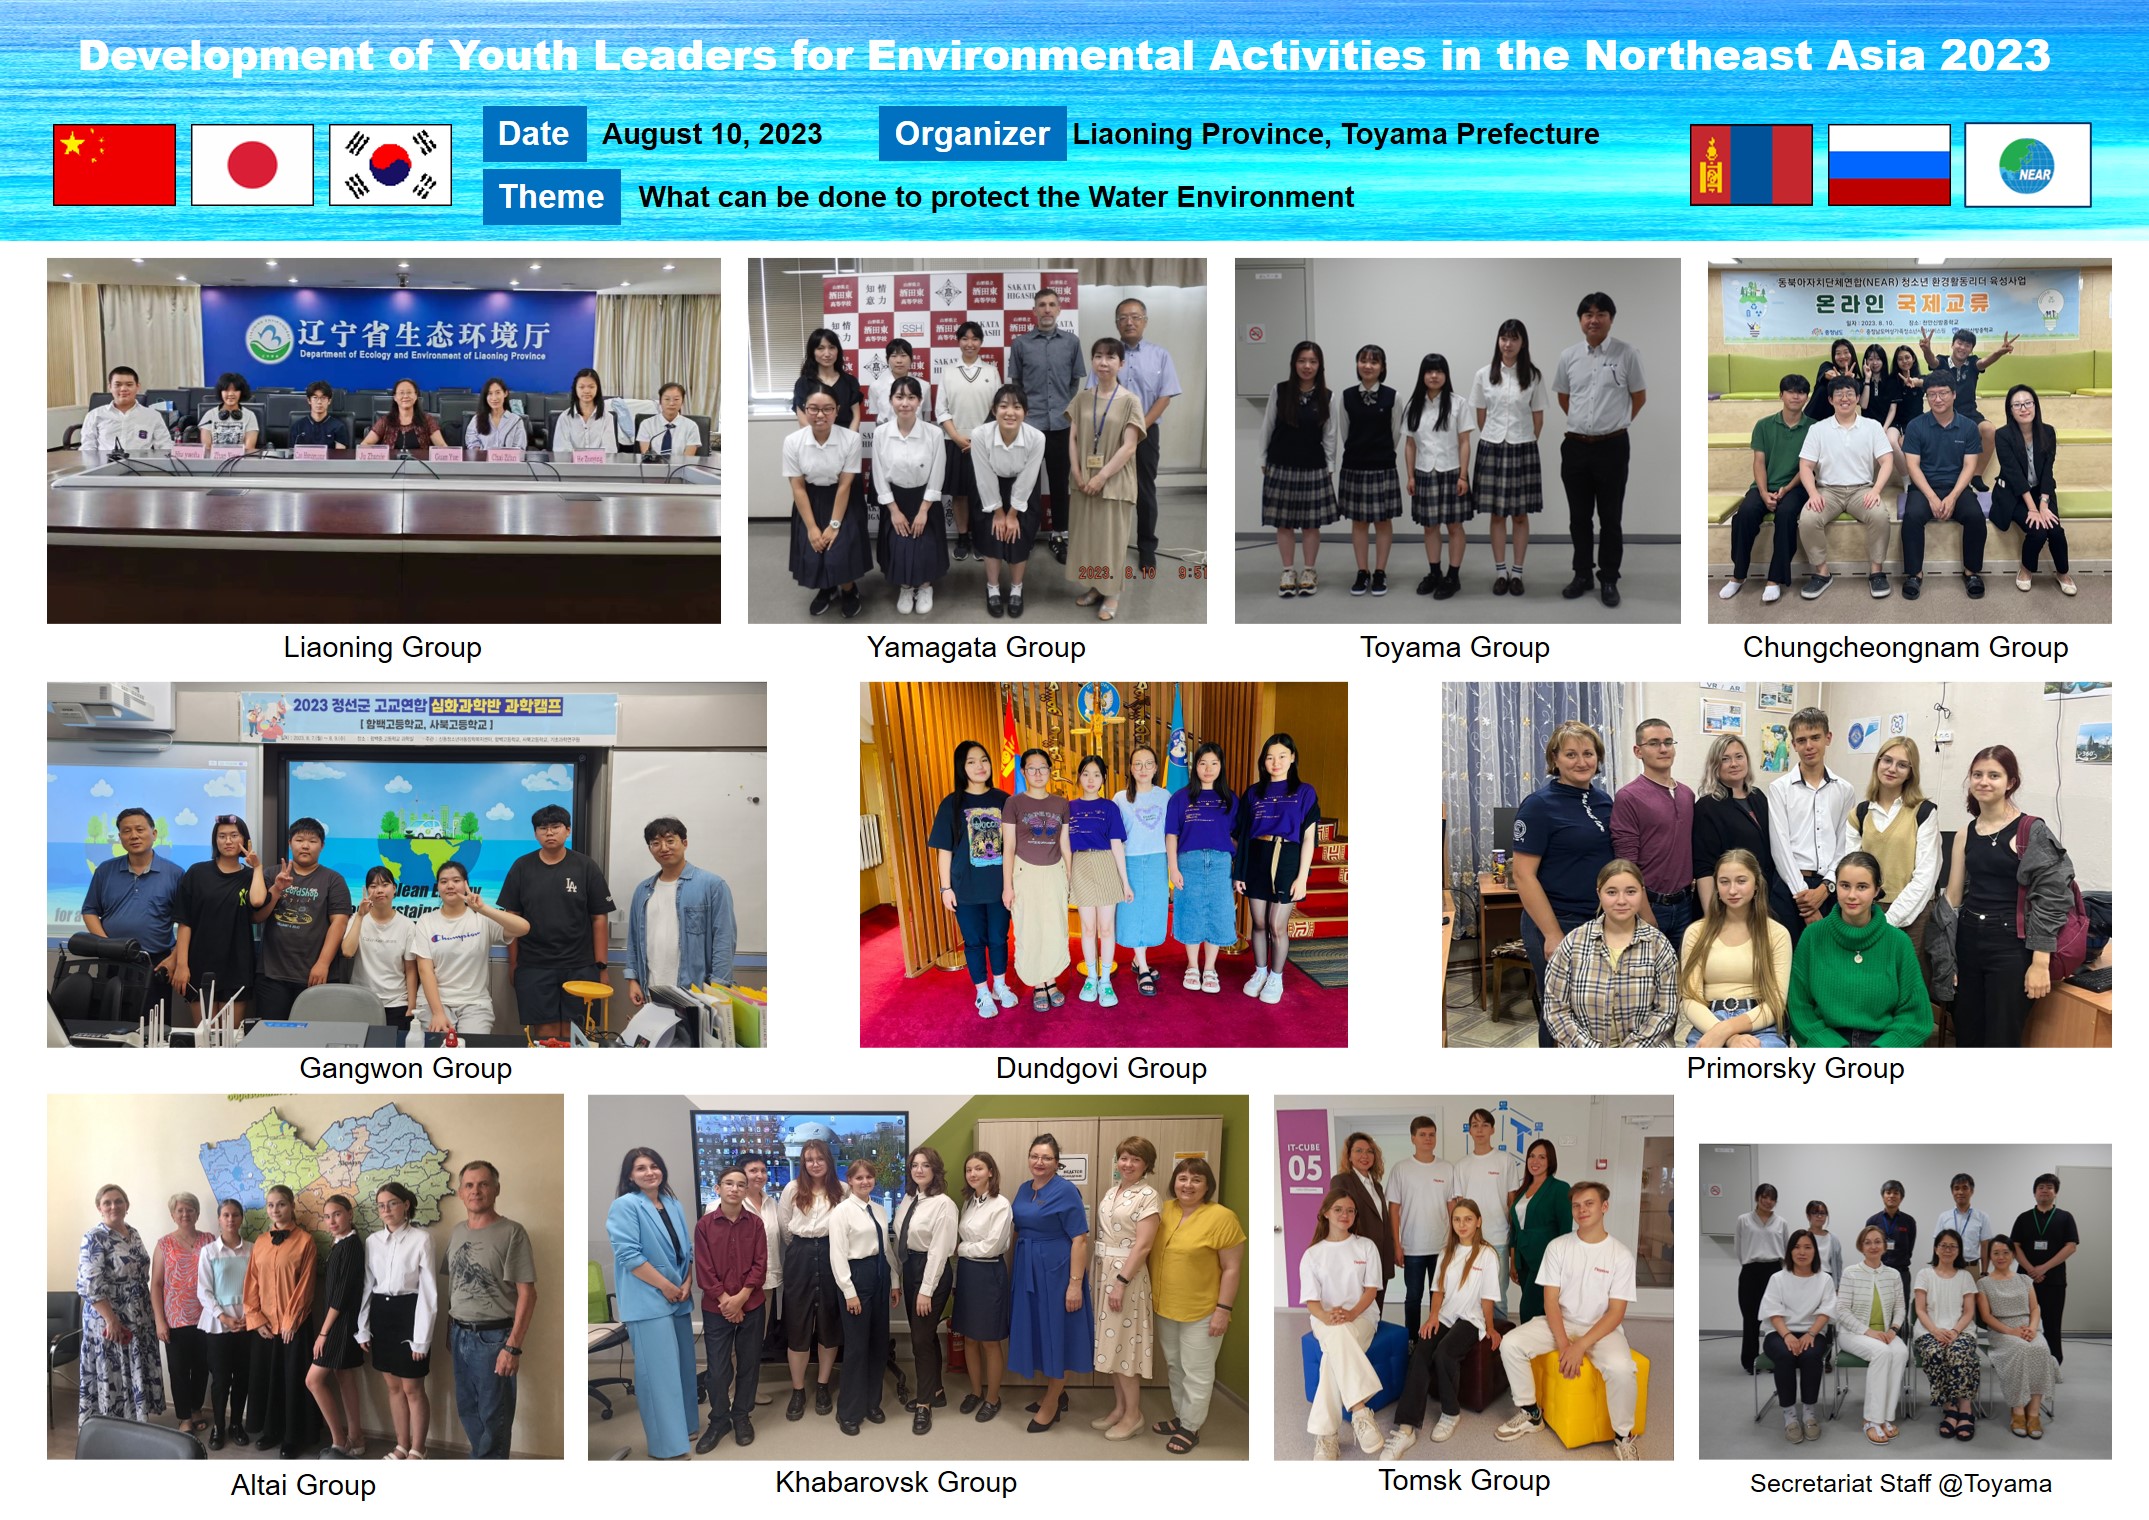 Development of the youth leaders for the environmental activities in the Northeast Asia